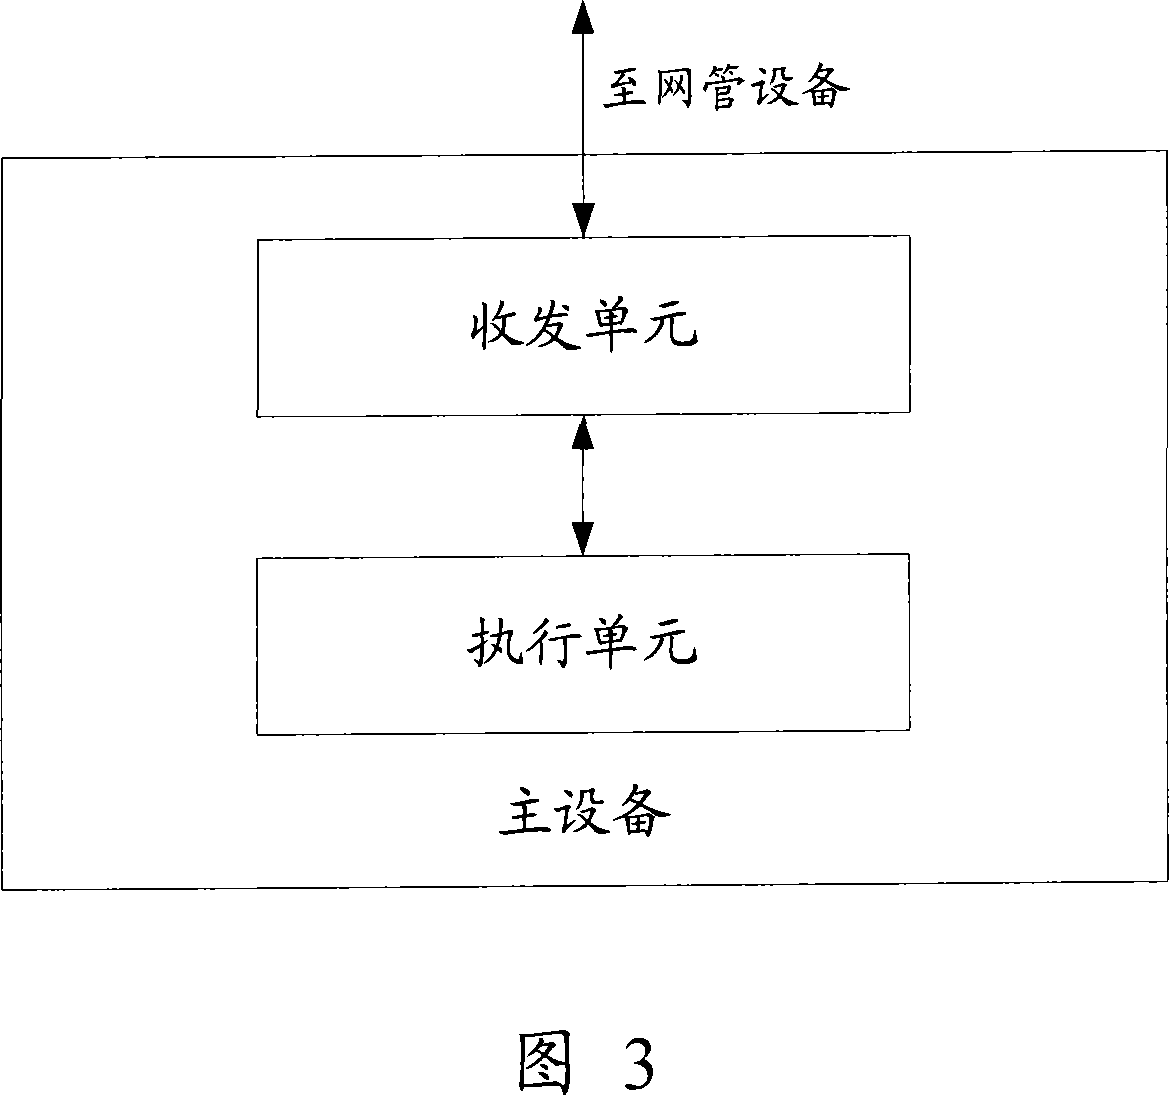 A method, device and system realizing the upgrading of stacking device software